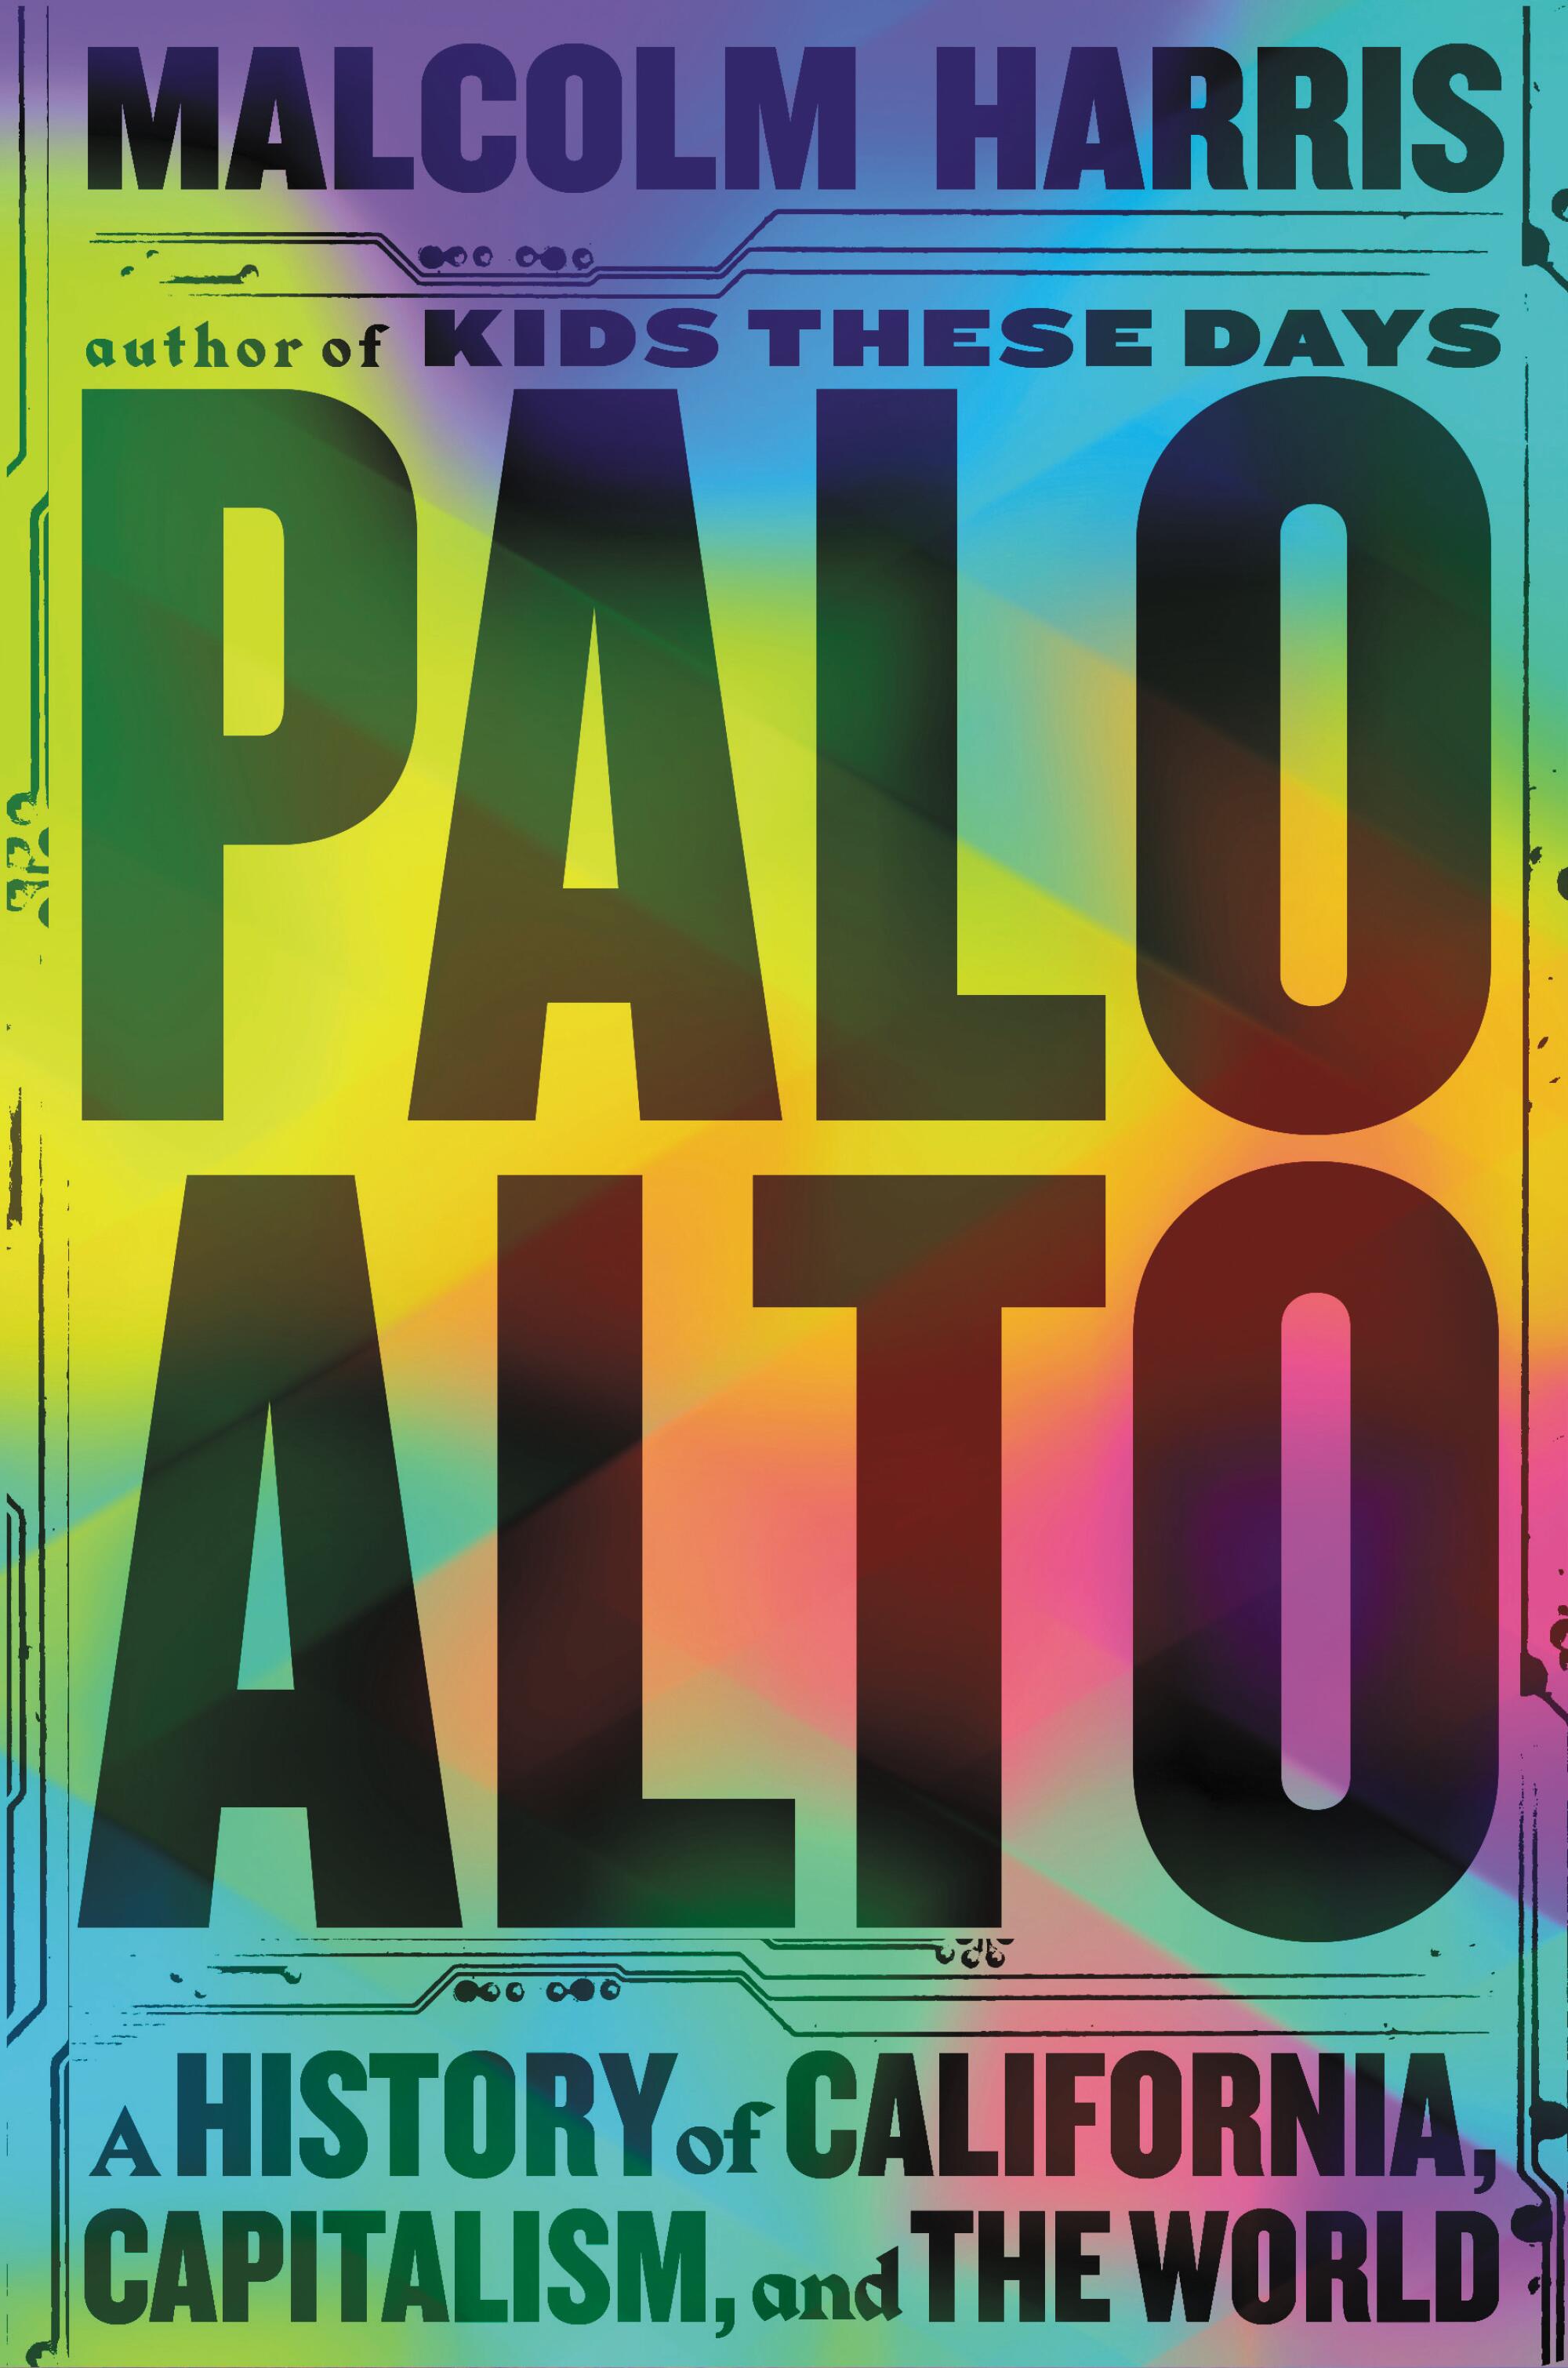 The cover of "Pal Alto," by Malcolm Harris.